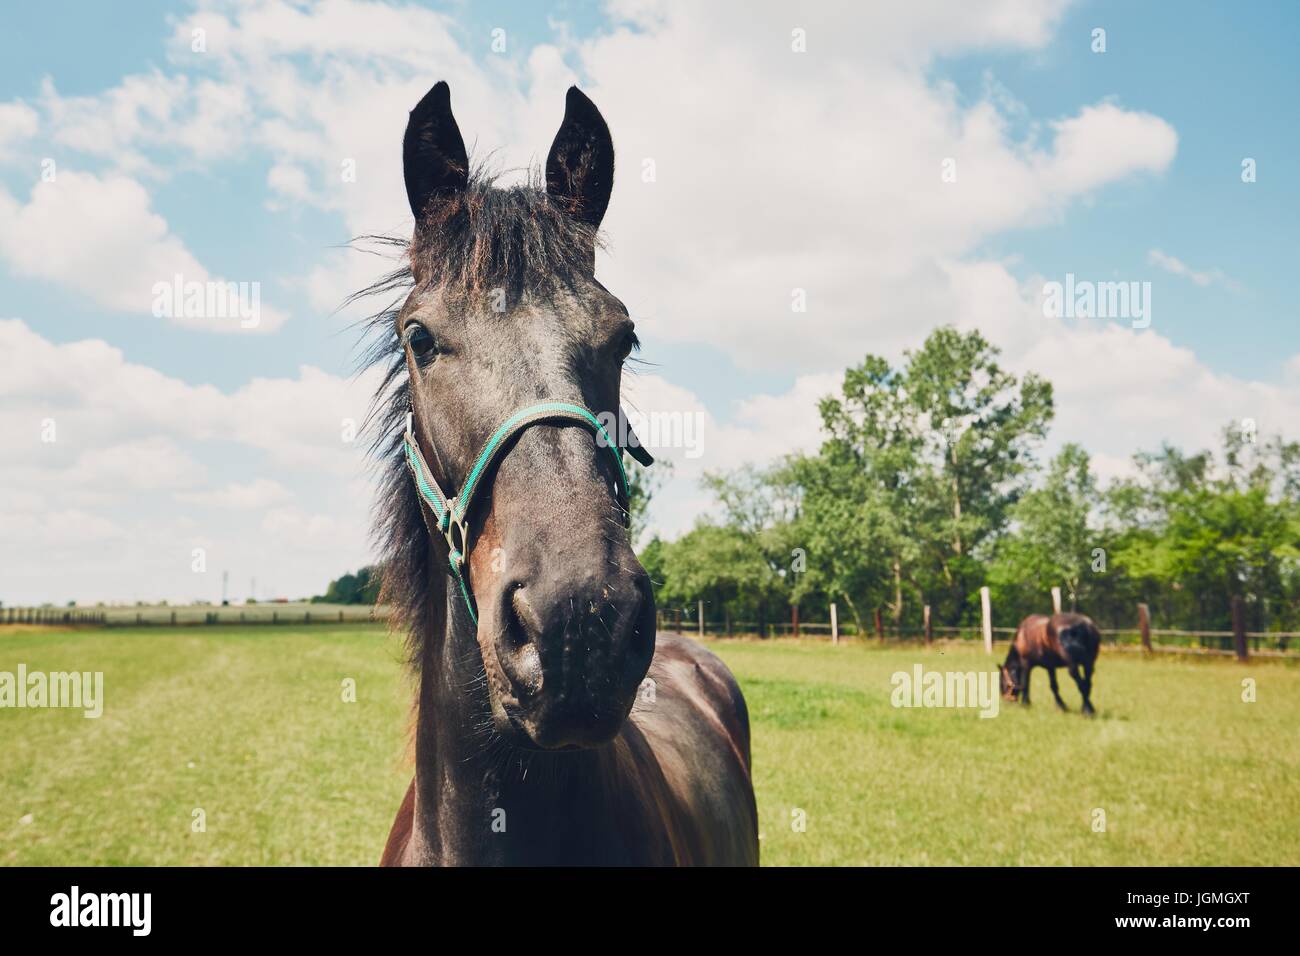 Summer day in the countryside. Two horses on the pasture. Czech Republic Stock Photo